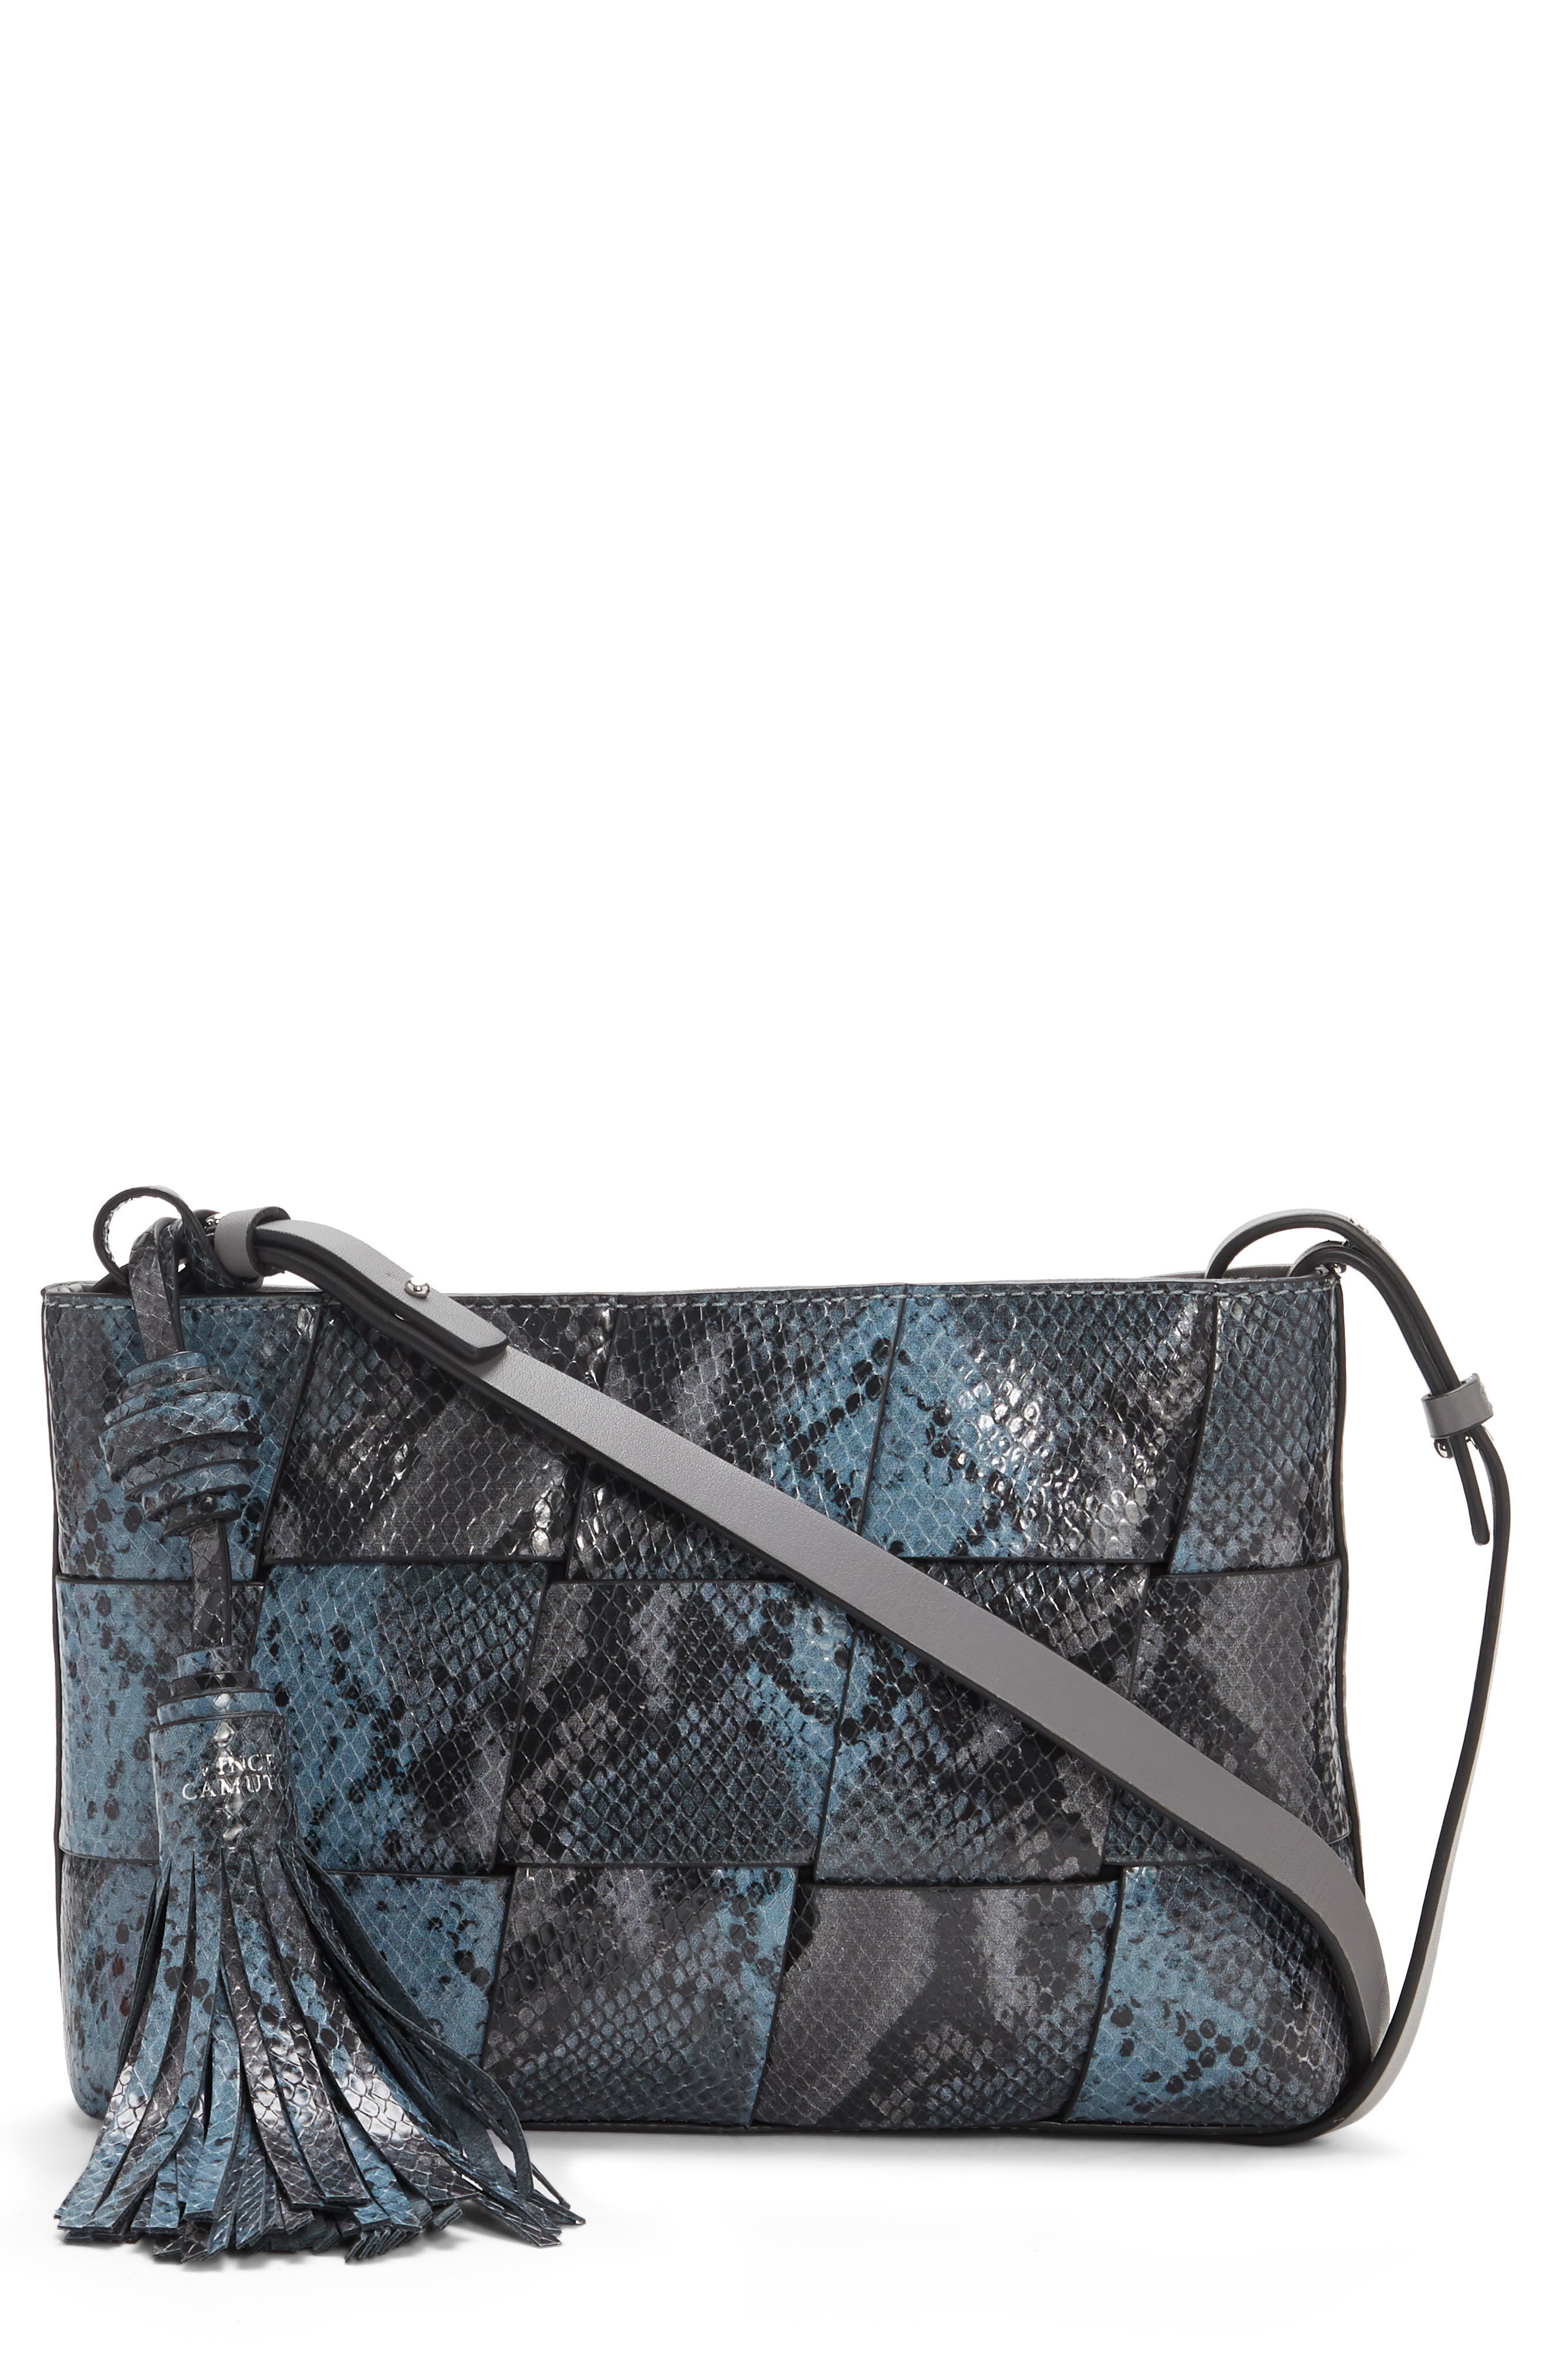 Vince Camuto Josy Woven Leather Crossbody Bag In Blue Multi | ModeSens